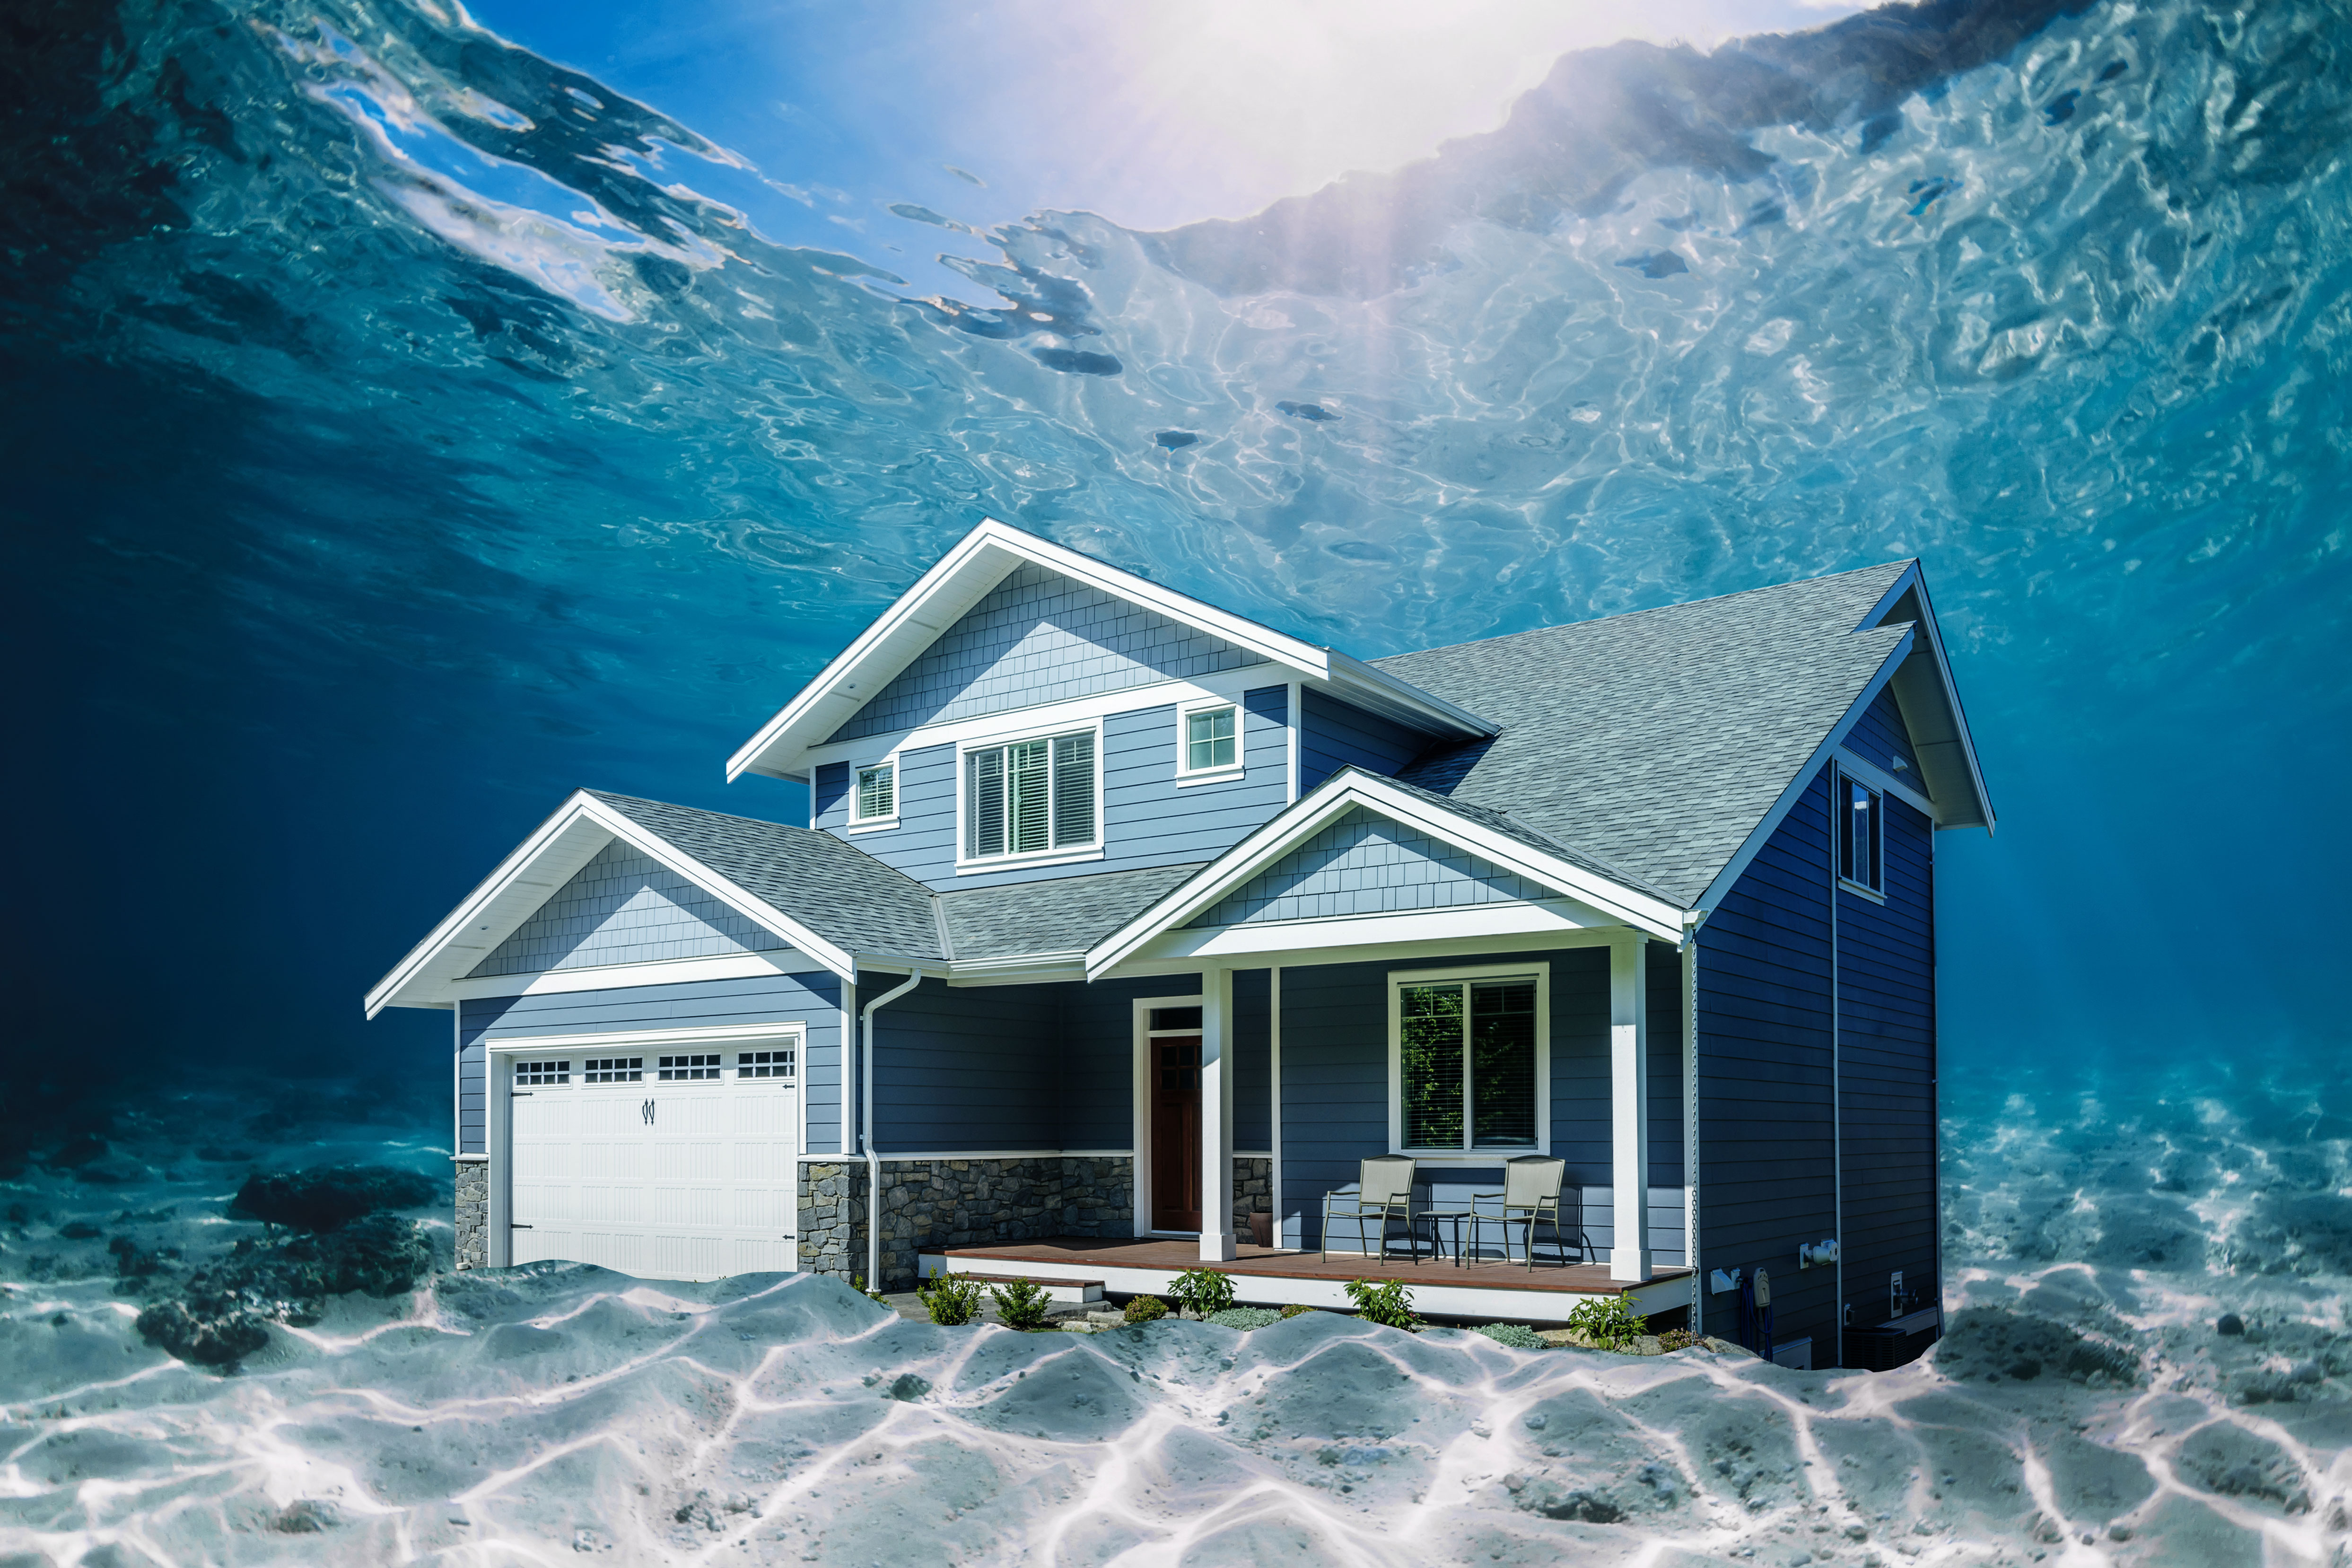 https://img.money.com/2022/12/News-2023-Homes-Could-Be-Underwater.jpg?quality=85